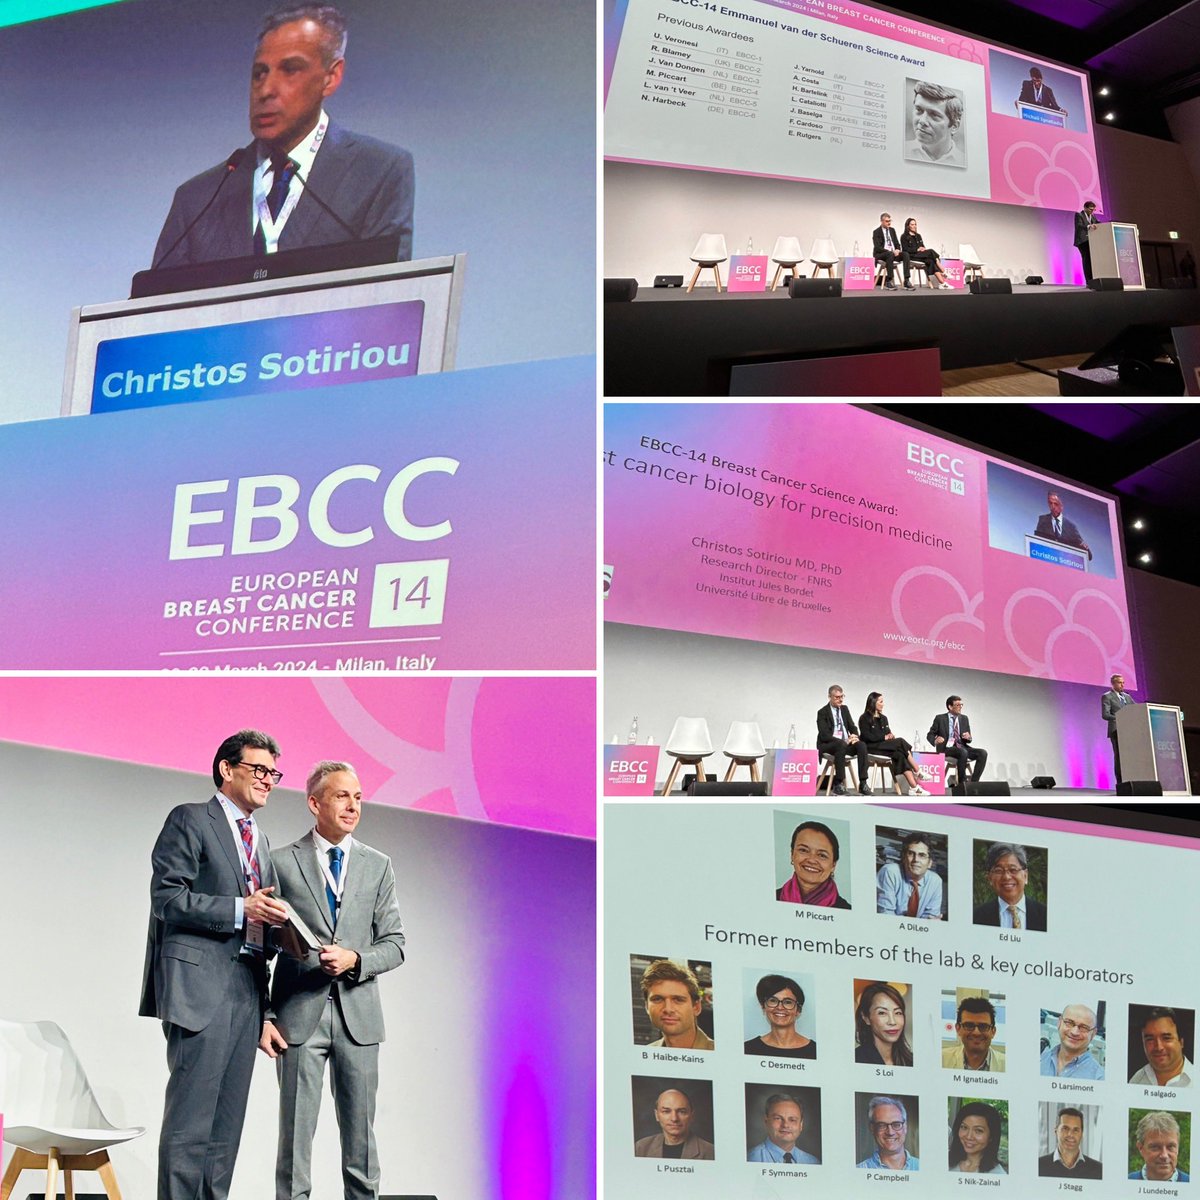 Congratulations to @c_sotiriou on his brilliant research journey, which aims to advance our knowledge of #breastcancer and improve care for our patients @JulesBordet 👏🏻#scienceaward #EBCC14 @EORTC 🧬🔬